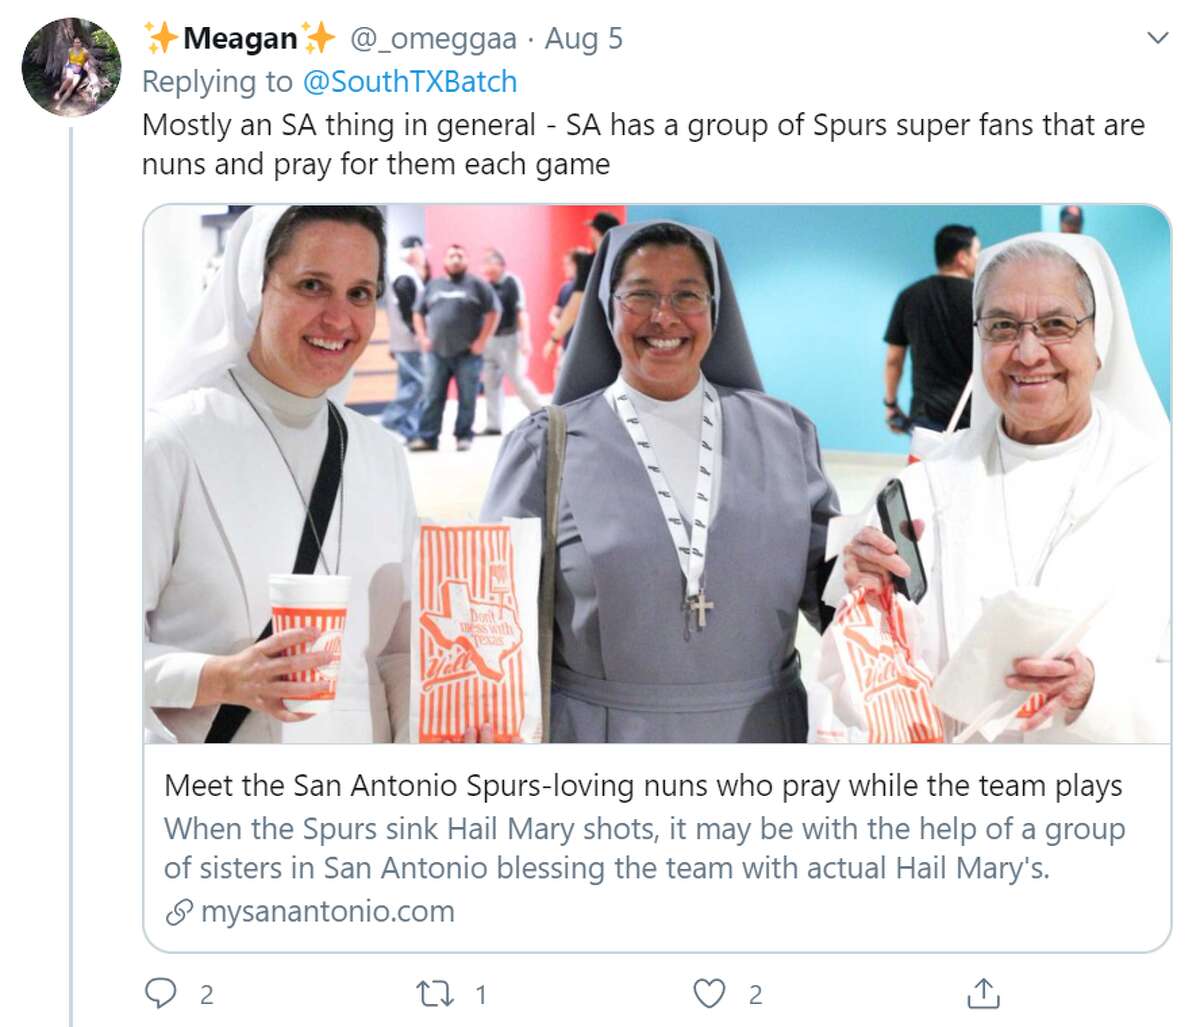 @_omeggaa said "Mostly an SA thing in general - SA has a group of Spurs super fans that are nuns and pray for them each game."